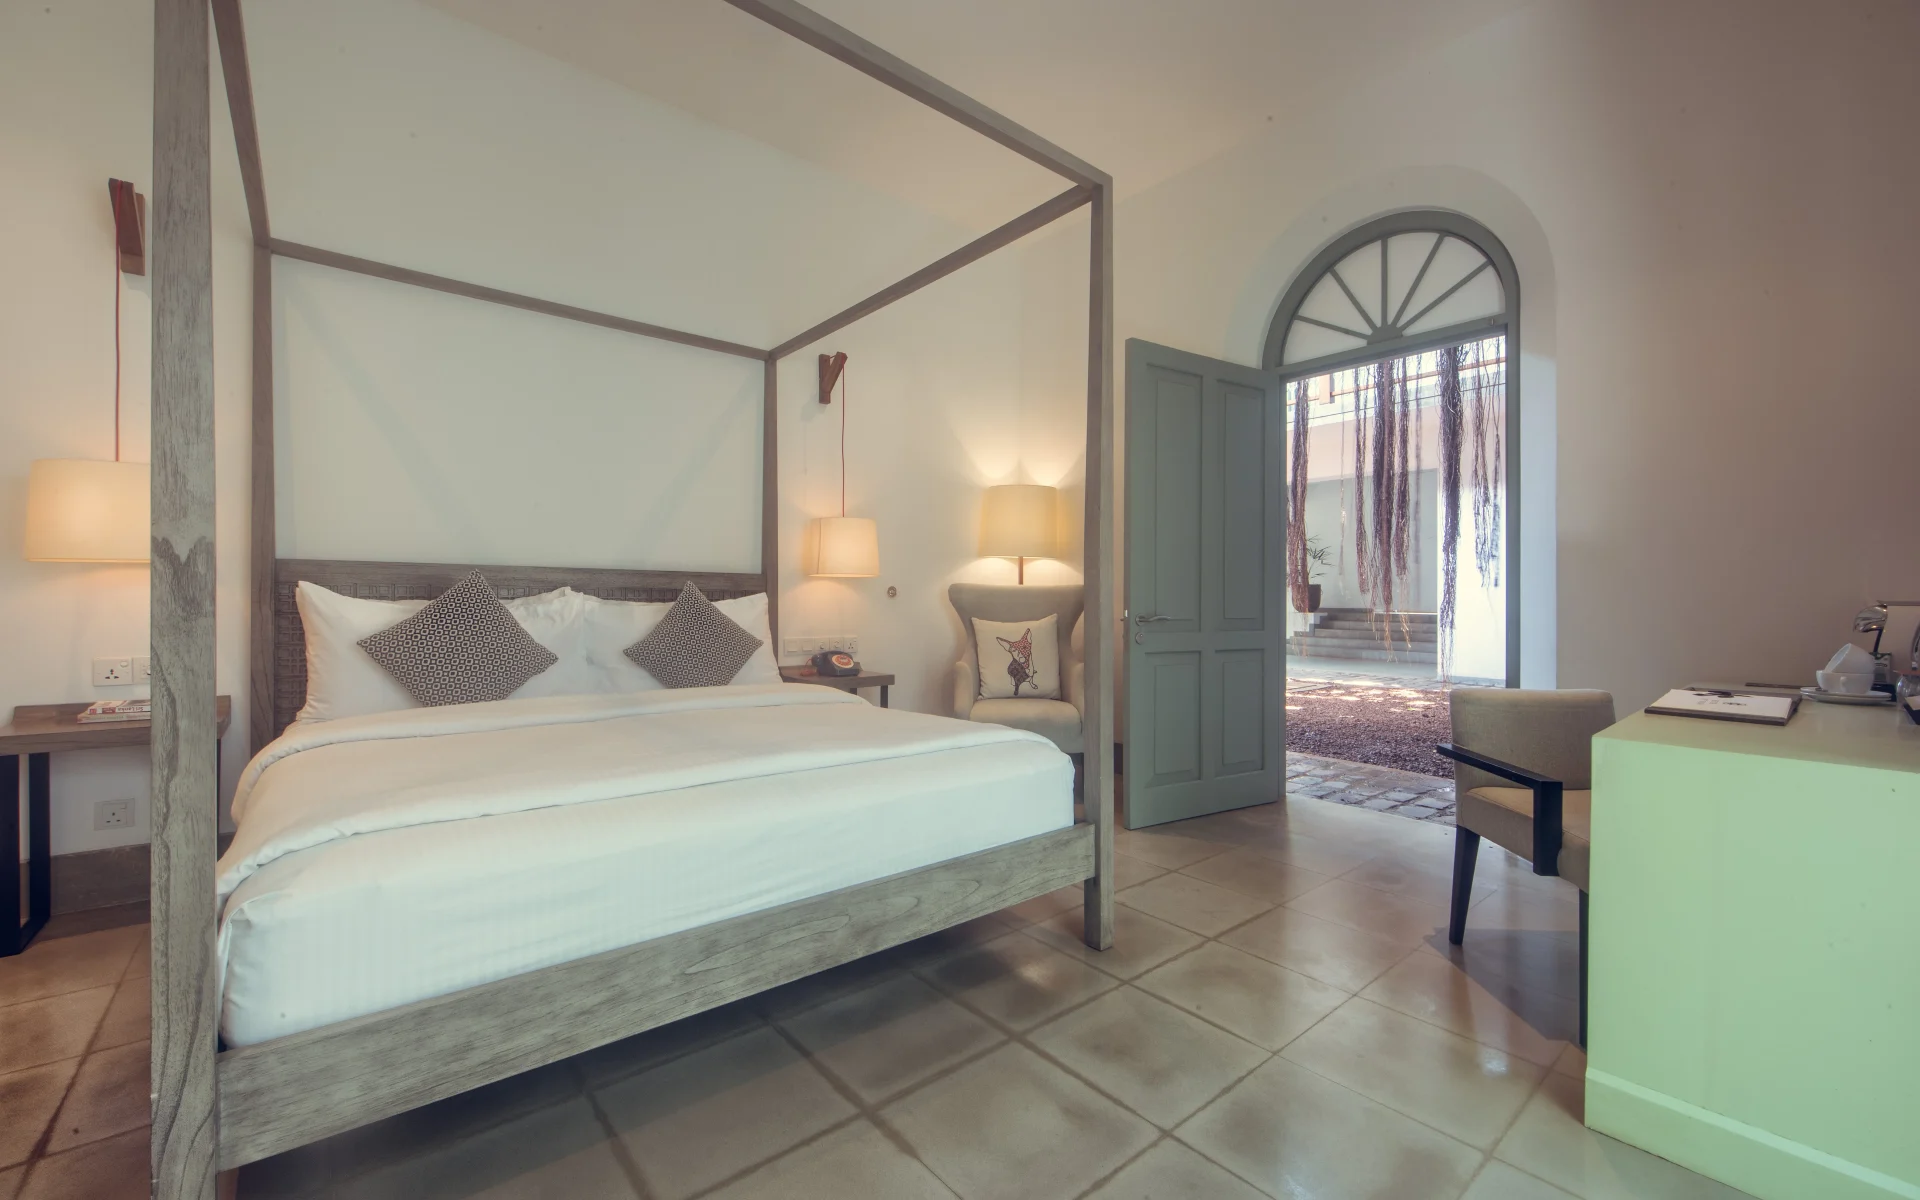 One of the bedrooms has glossy, tiled flooring and a large, four-poster bed dressed in white linen bedding. The door leads directly outside.